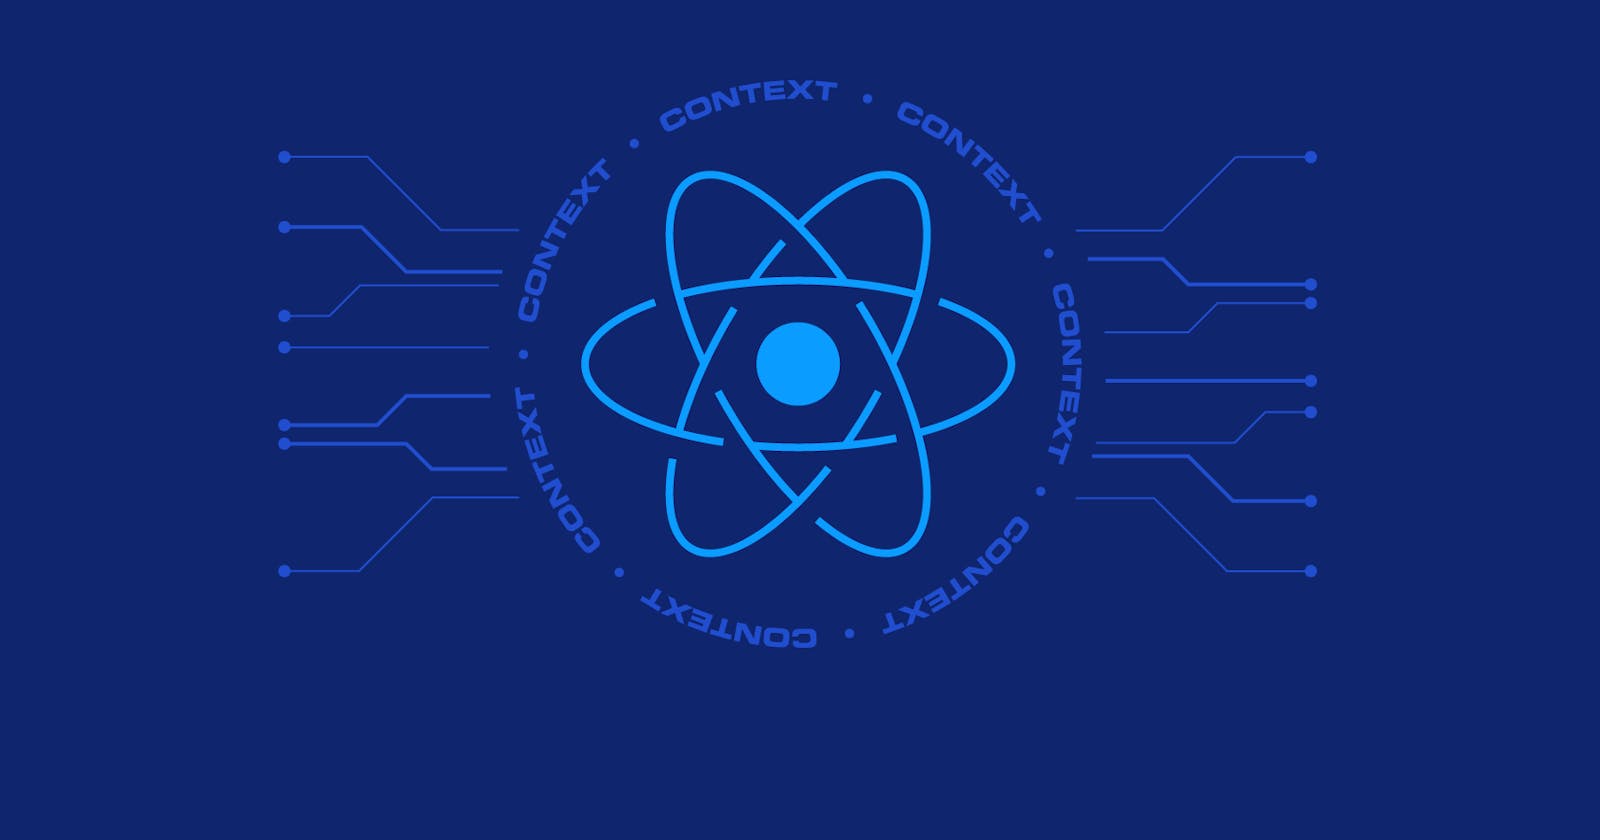 Render components conditionally in React